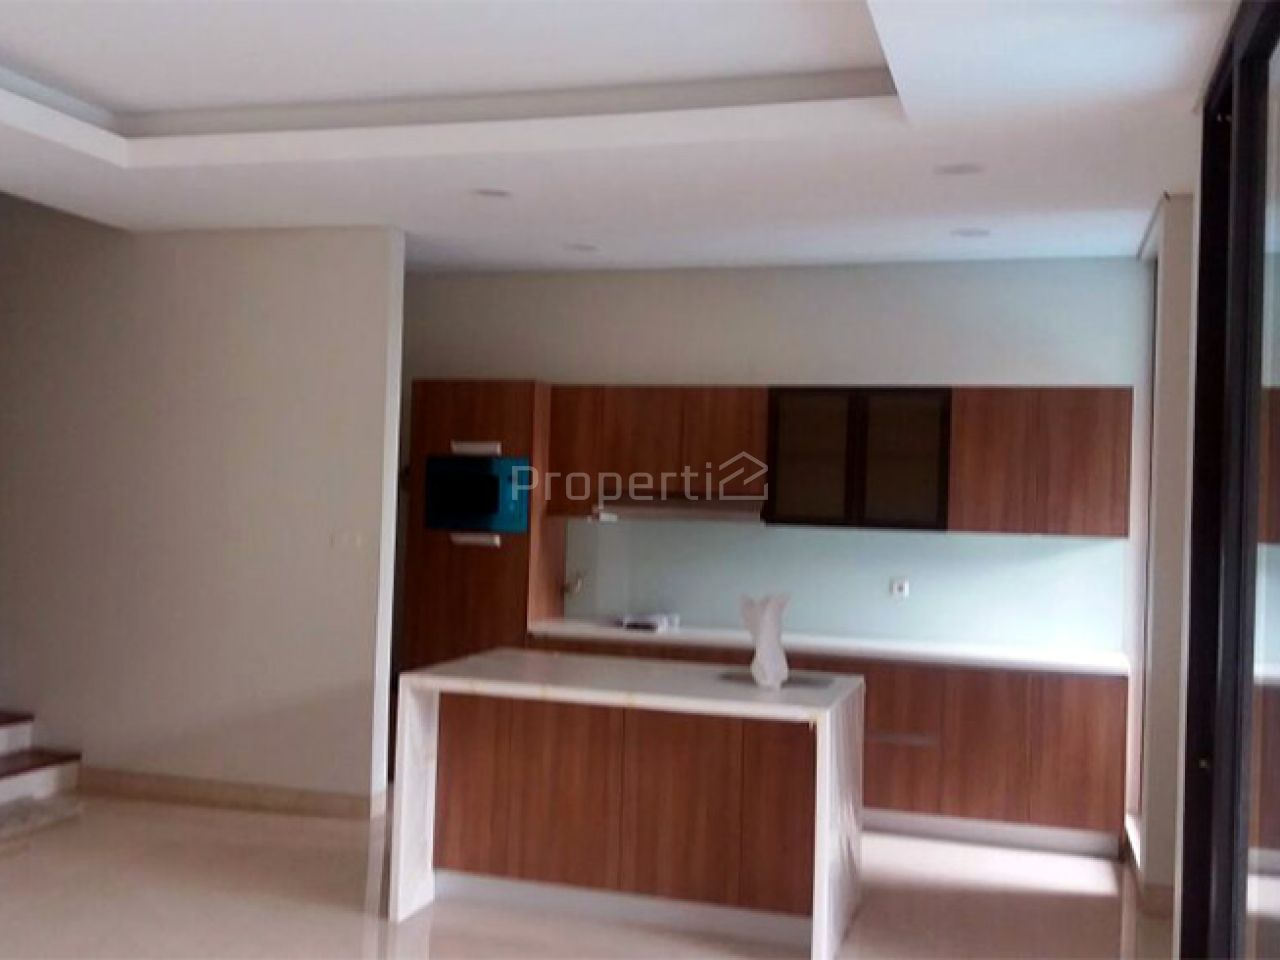 New Luxury House with Swimming Pool in Menteng, Jakarta Pusat